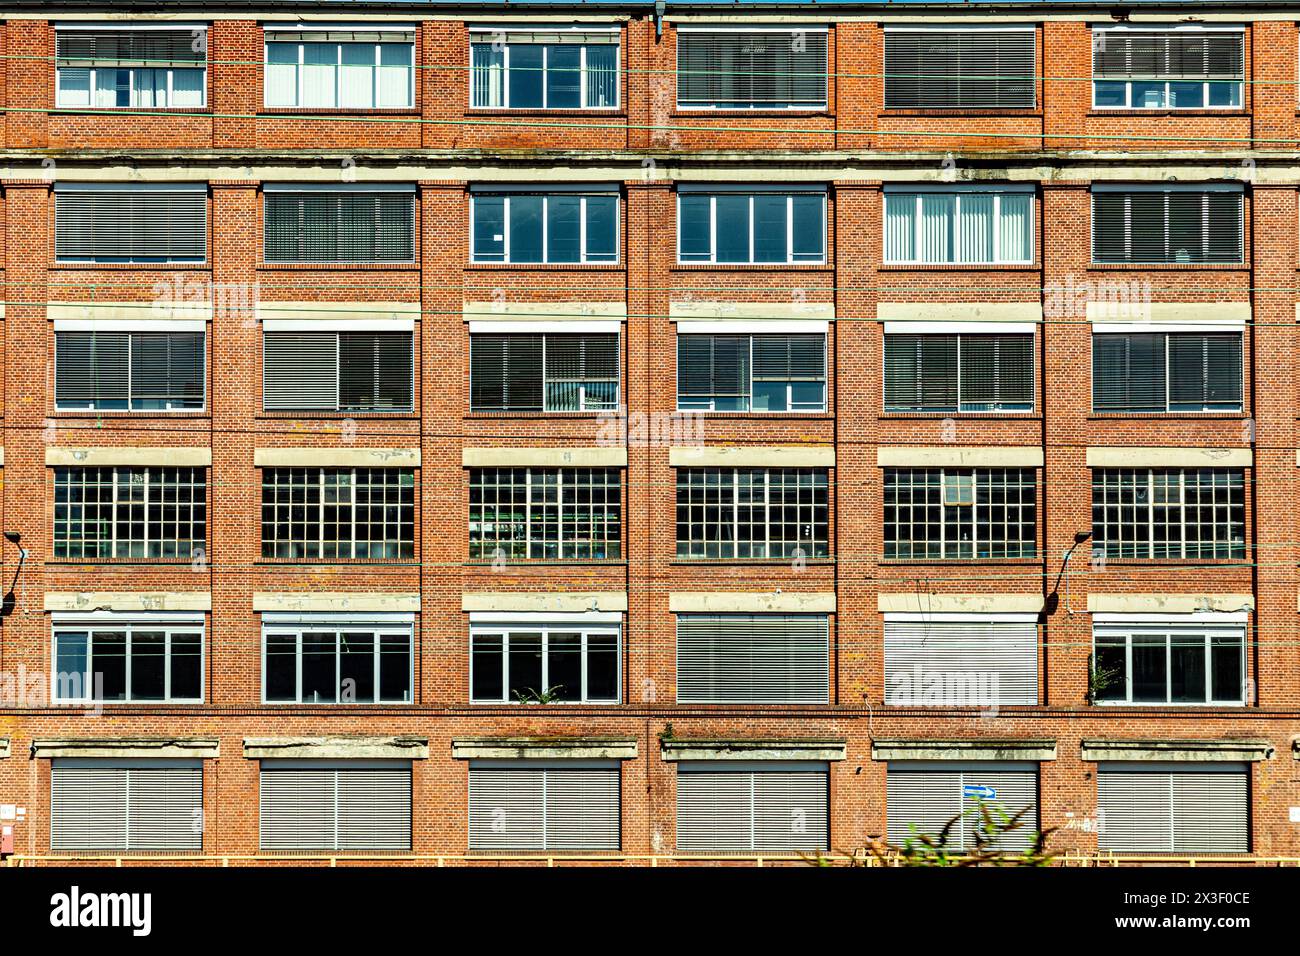 facade of old brick factors building with different windows and shutter blinds, closed, opend Stock Photo